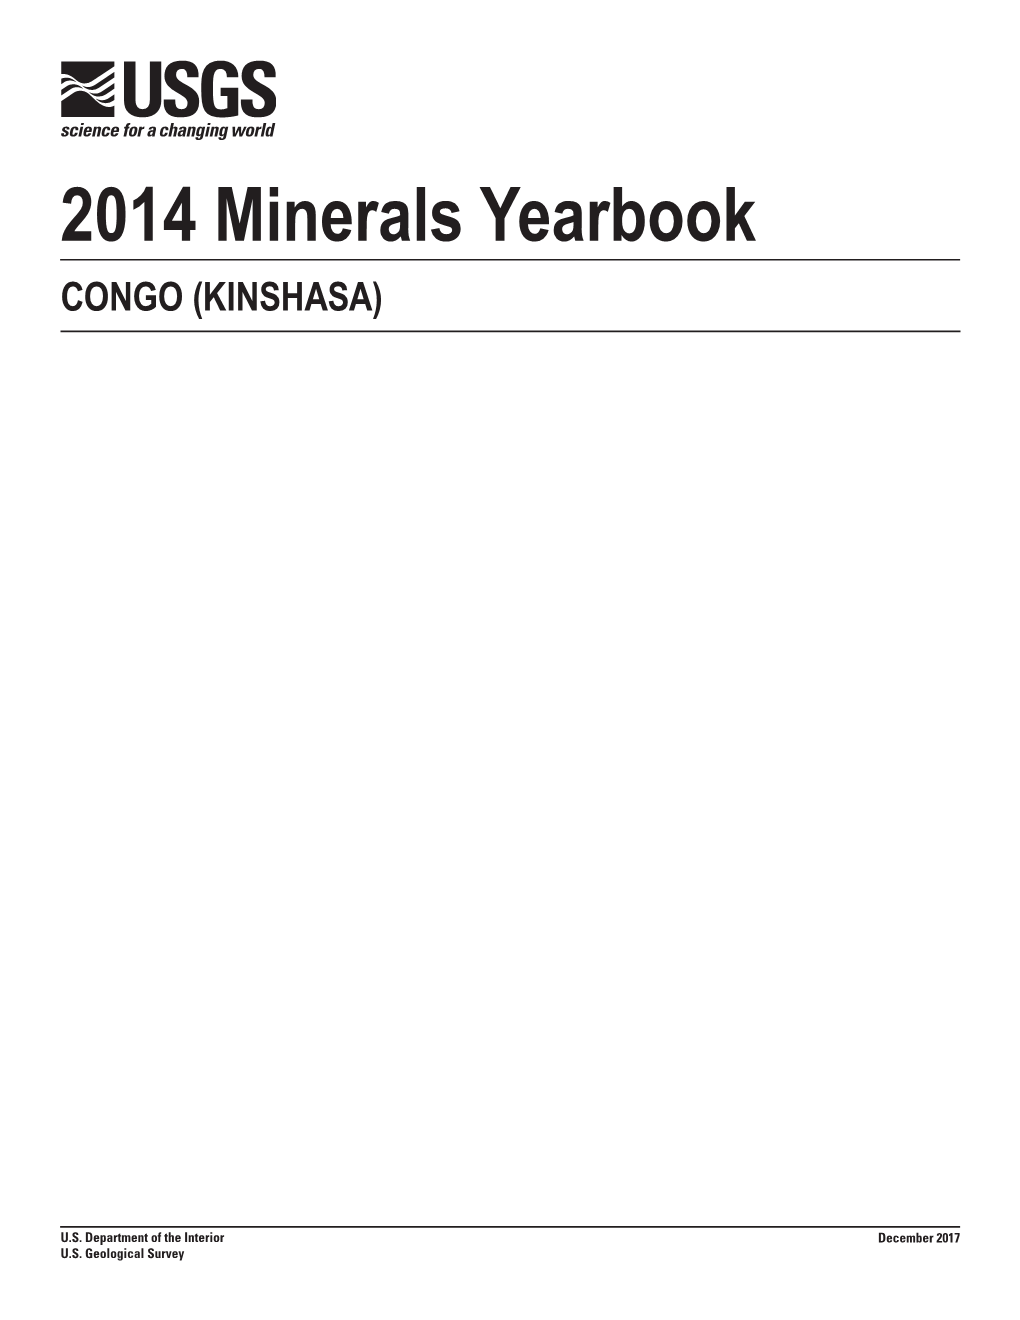 The Mineral Industry of Congo (Kinshasa) in 2014